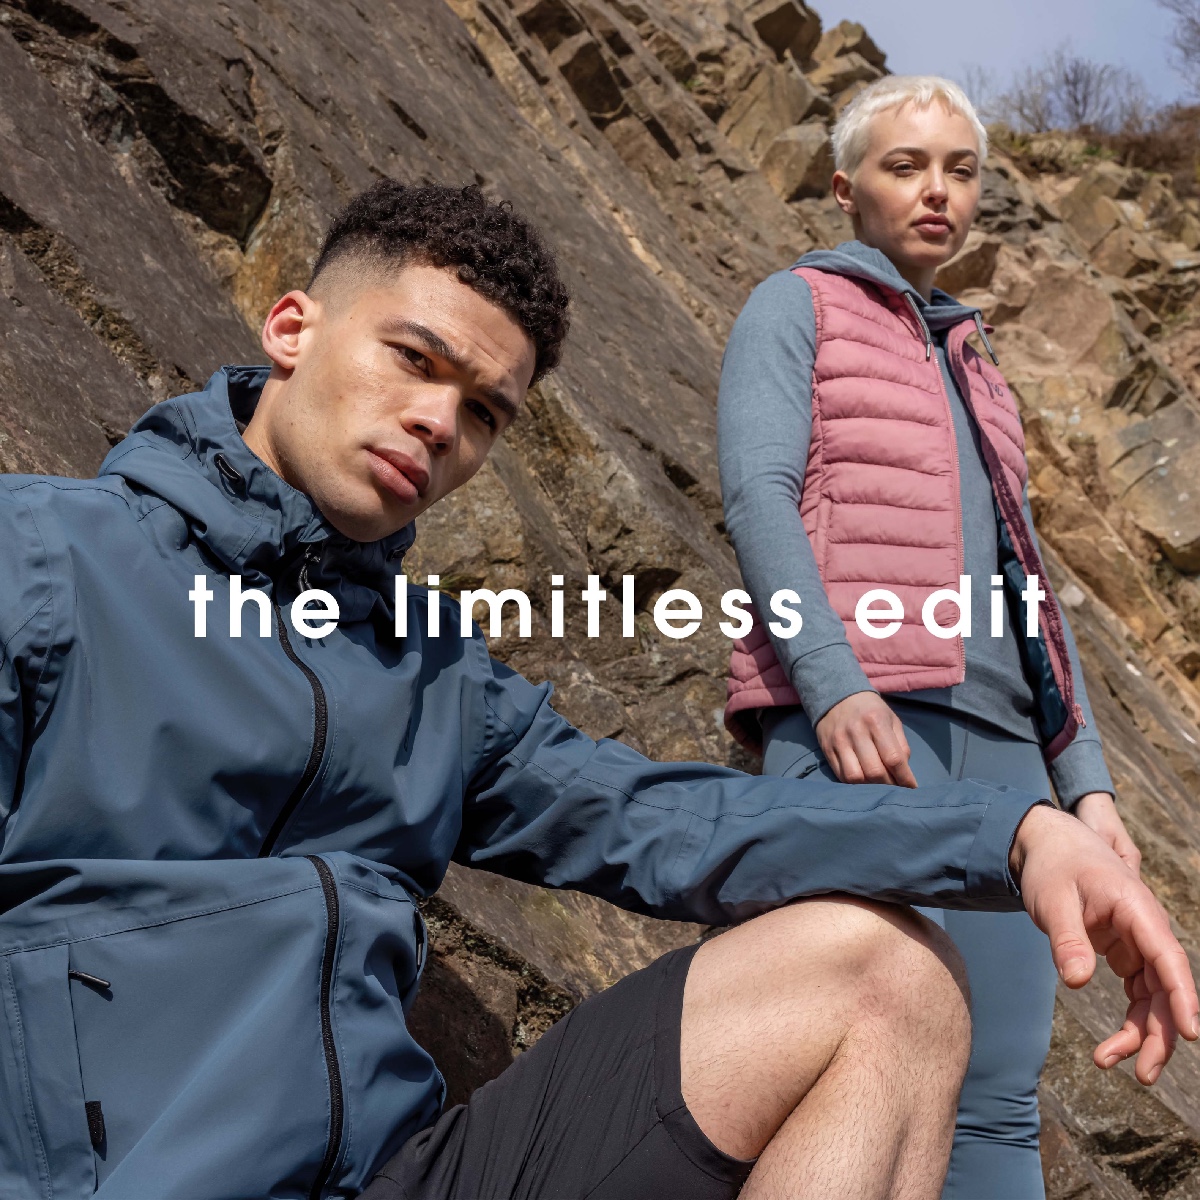 The future is Limitless. Venture into nature and chase infinite exploration opportunities with The Limitless Edit as your go to tool kit. Seek the styles to support your limitless journey via our Instagram stories.